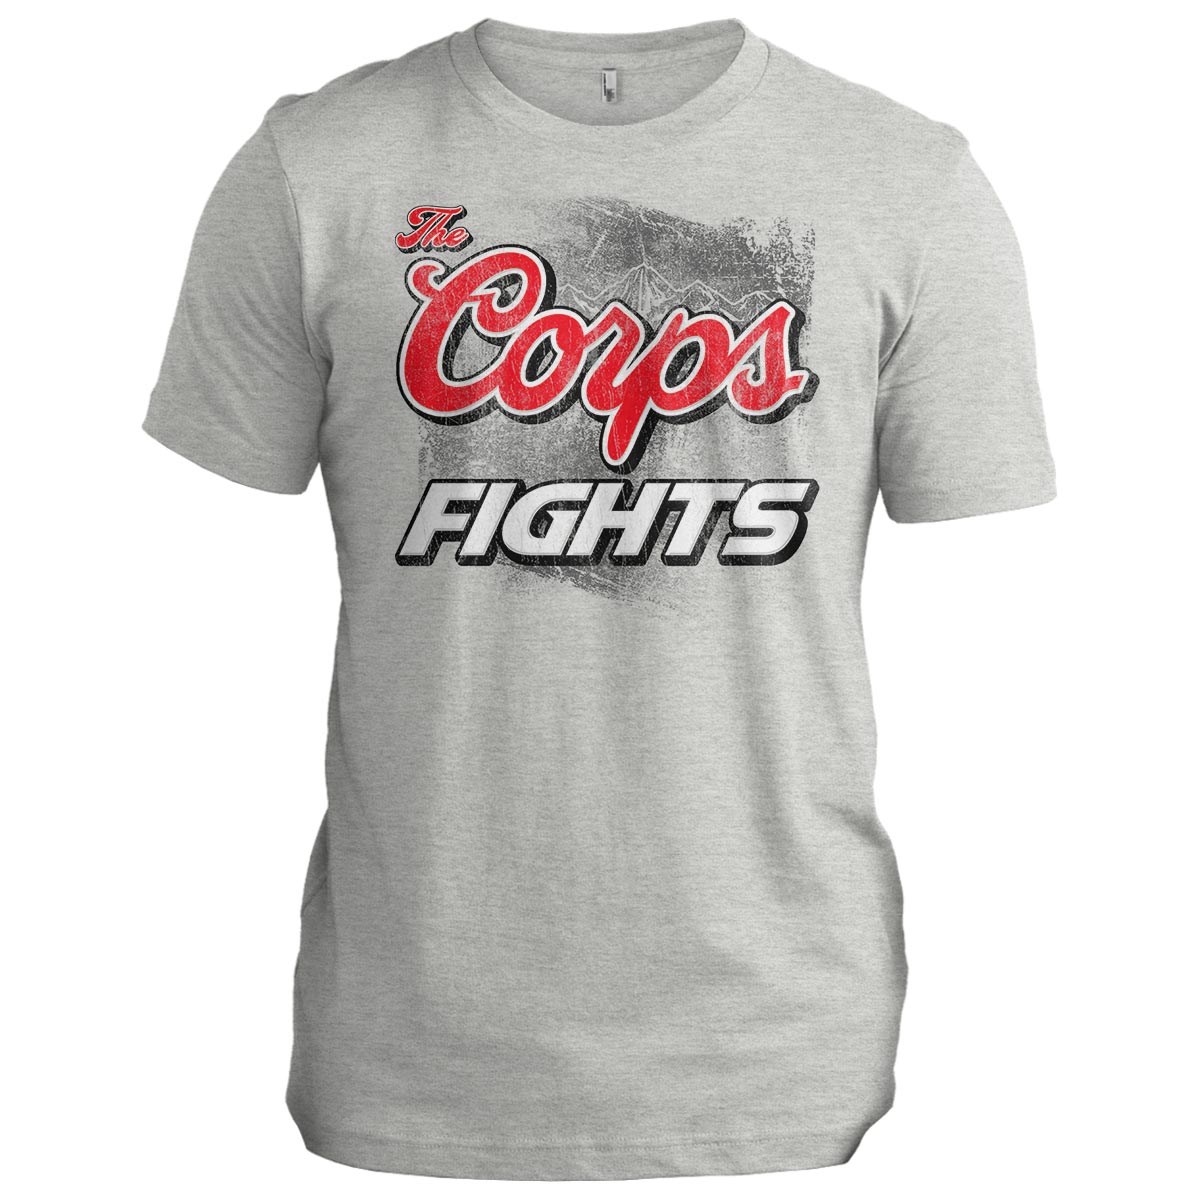 The Corps Fights